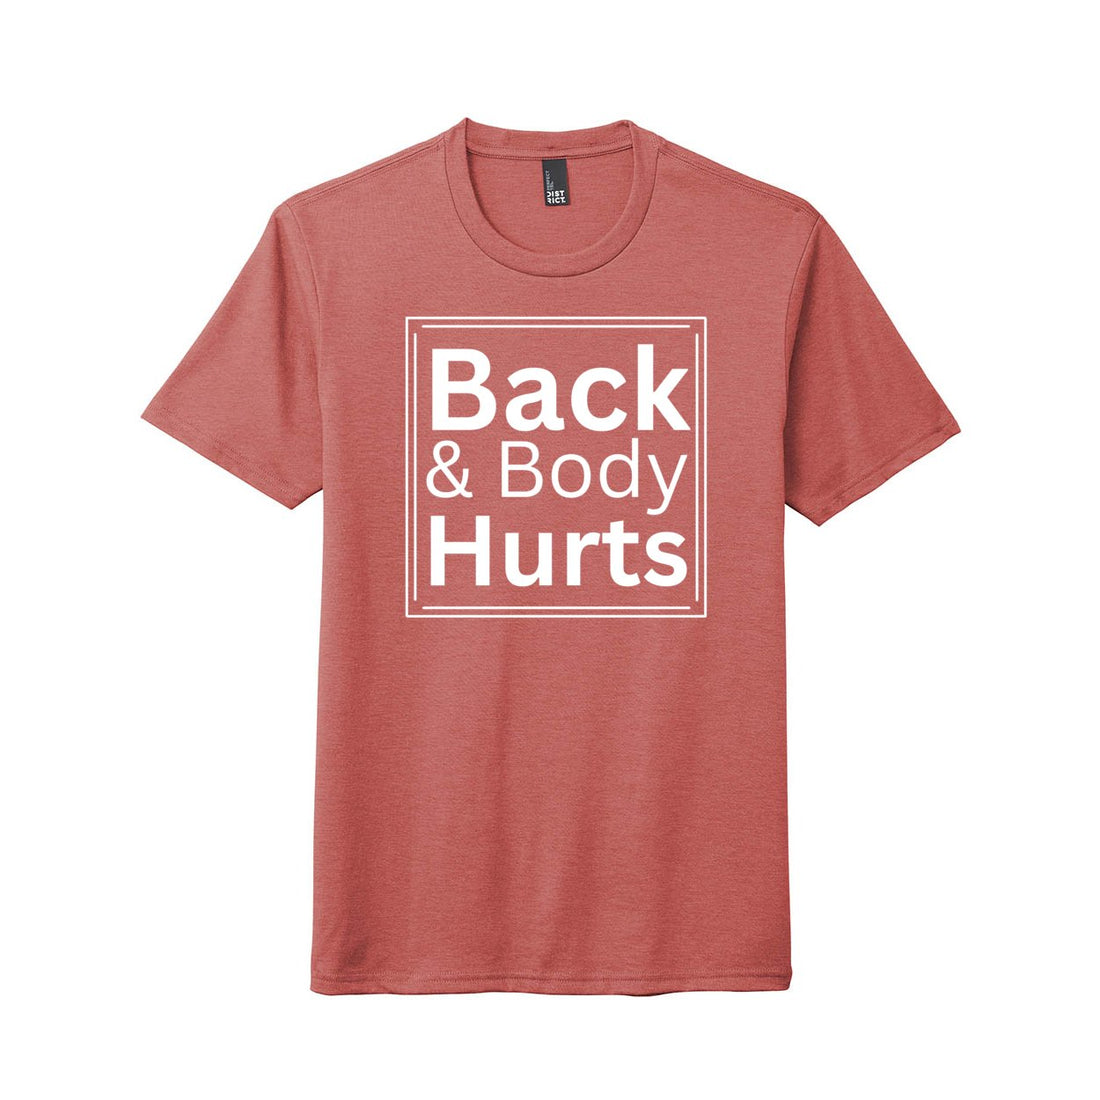 Back & Body Hurts District Tee - T-Shirts - Positively Sassy - Back & Body Hurts District Tee